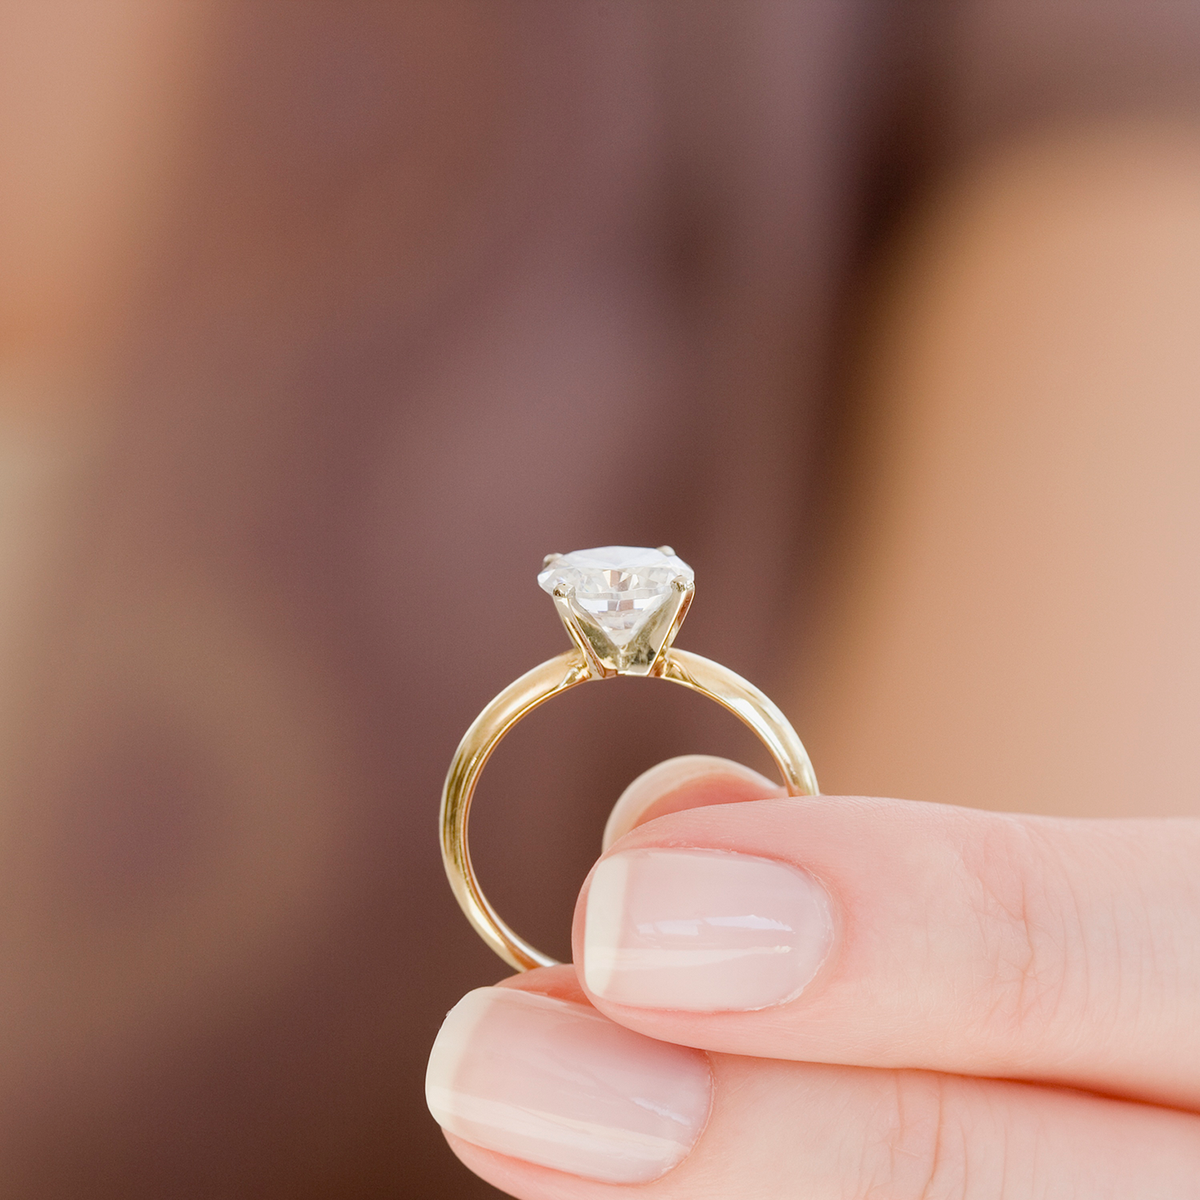 Take this cool quiz before buying your Diamond ring - Find out